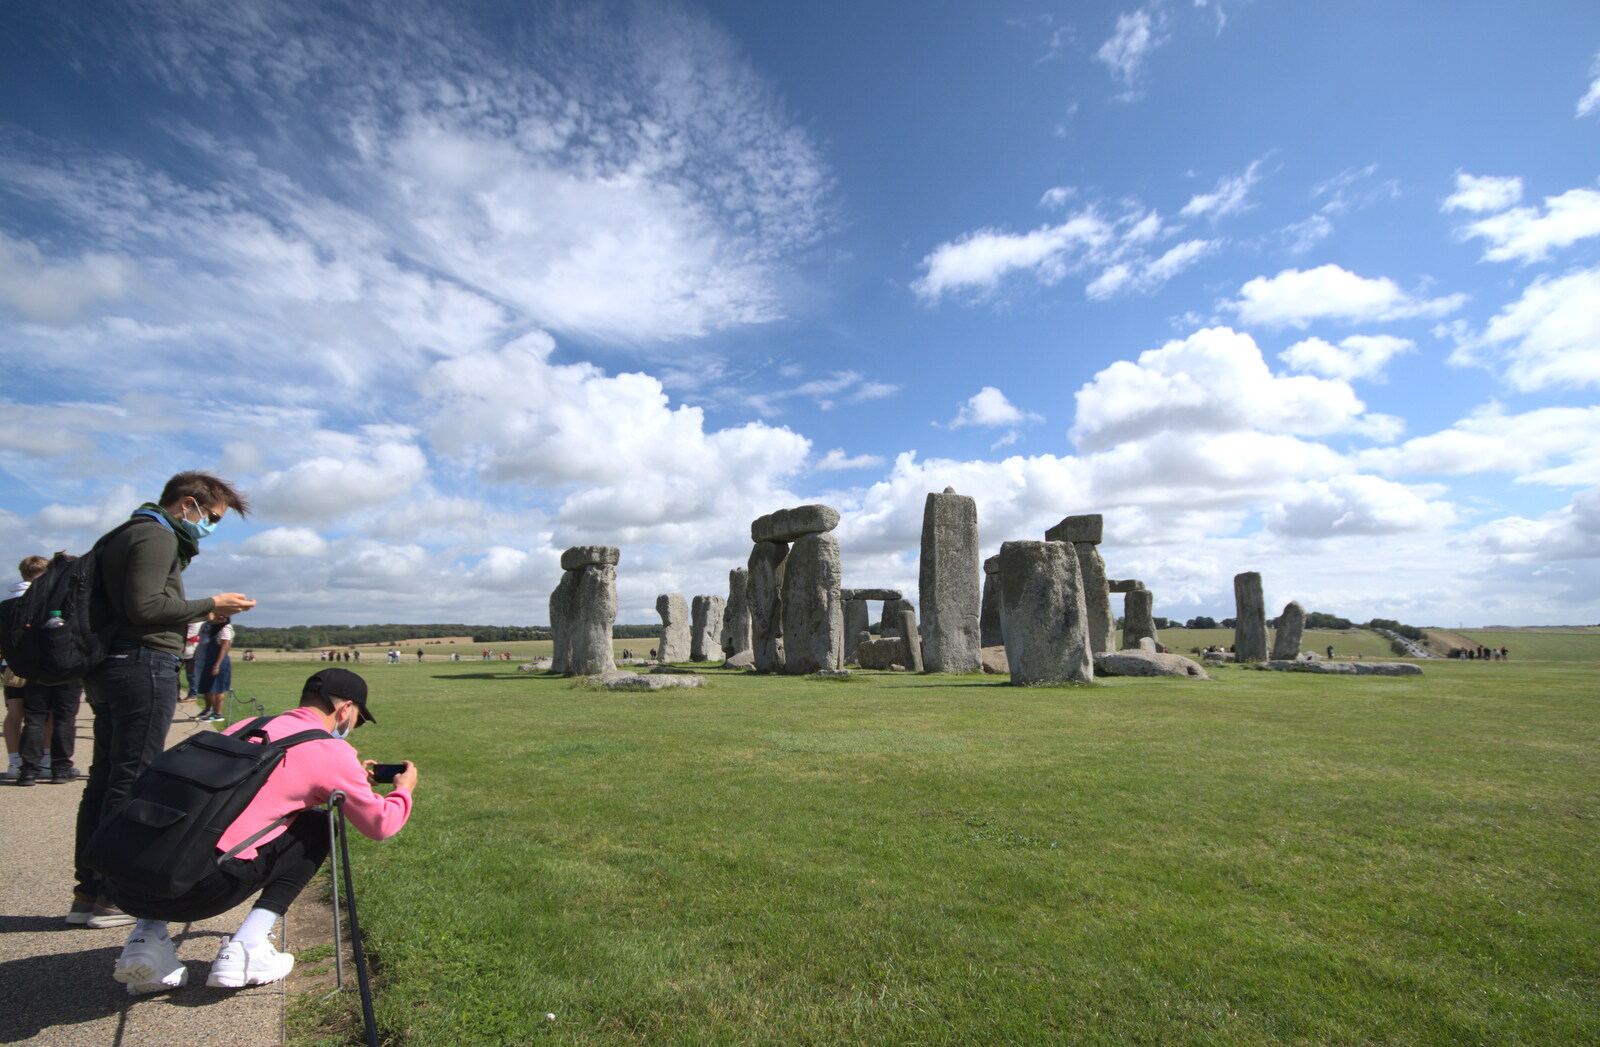 More tourists take photos from Stone Circles: Stonehenge and Avebury, Wiltshire - 22nd August 2020